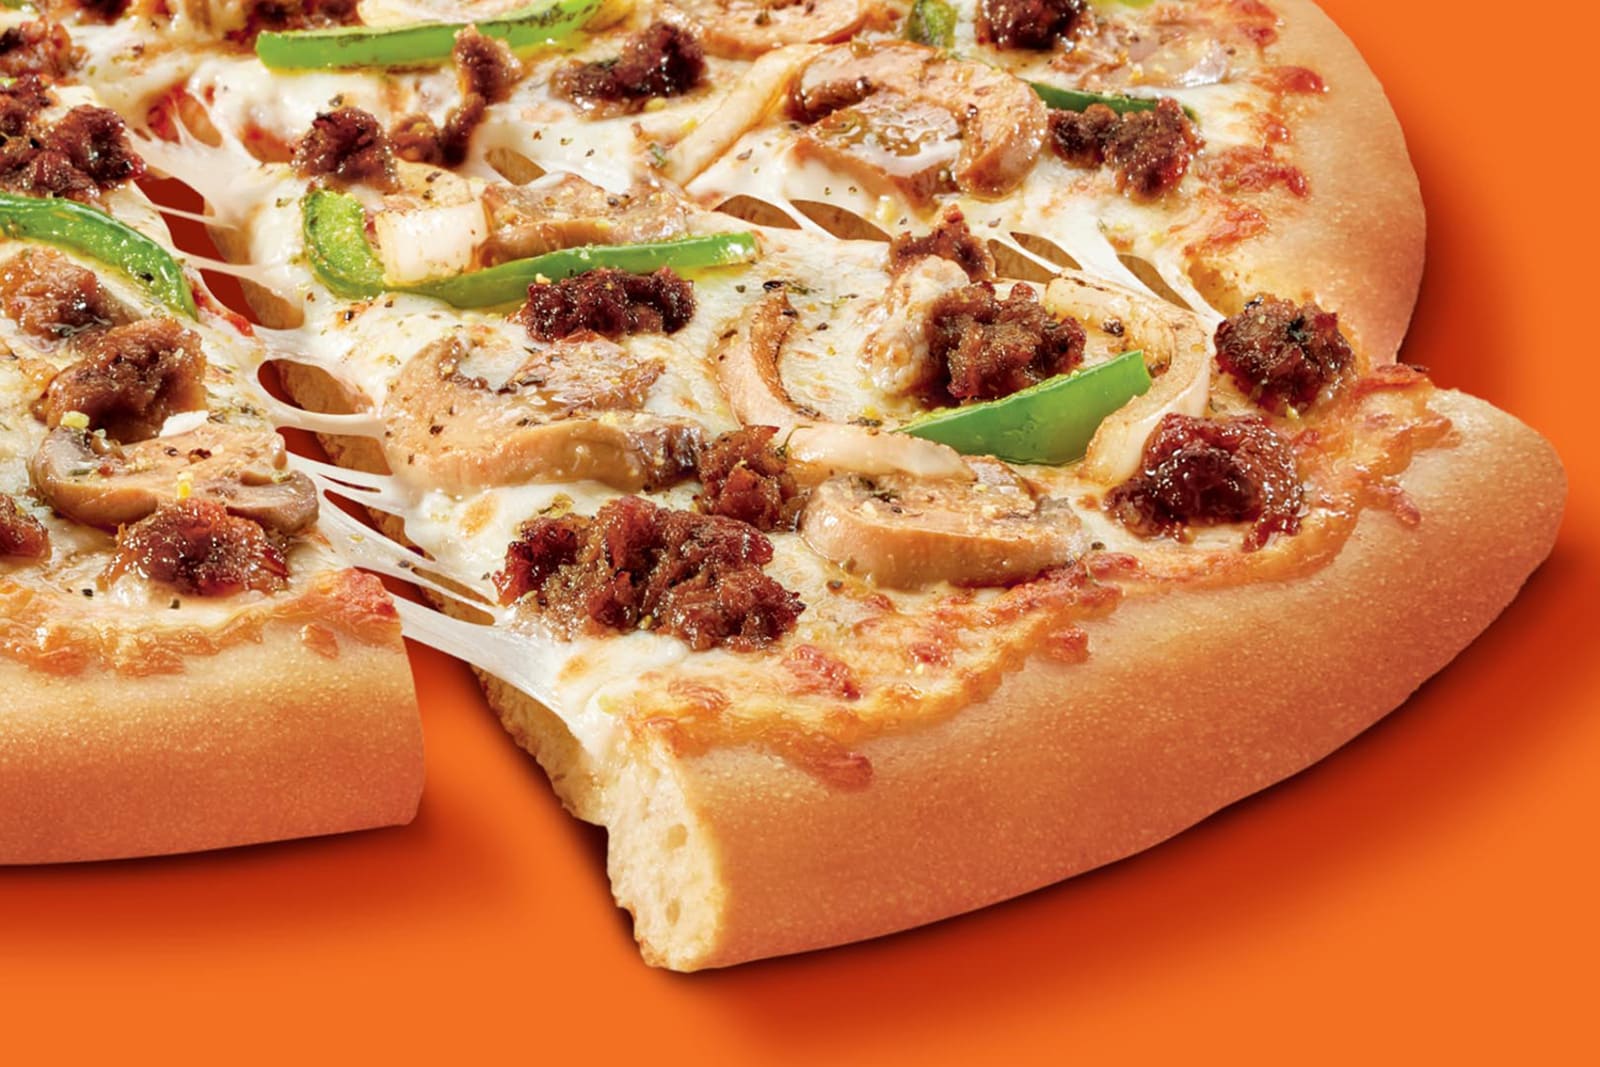 Impossible launches sausage pizza with Little Caesars